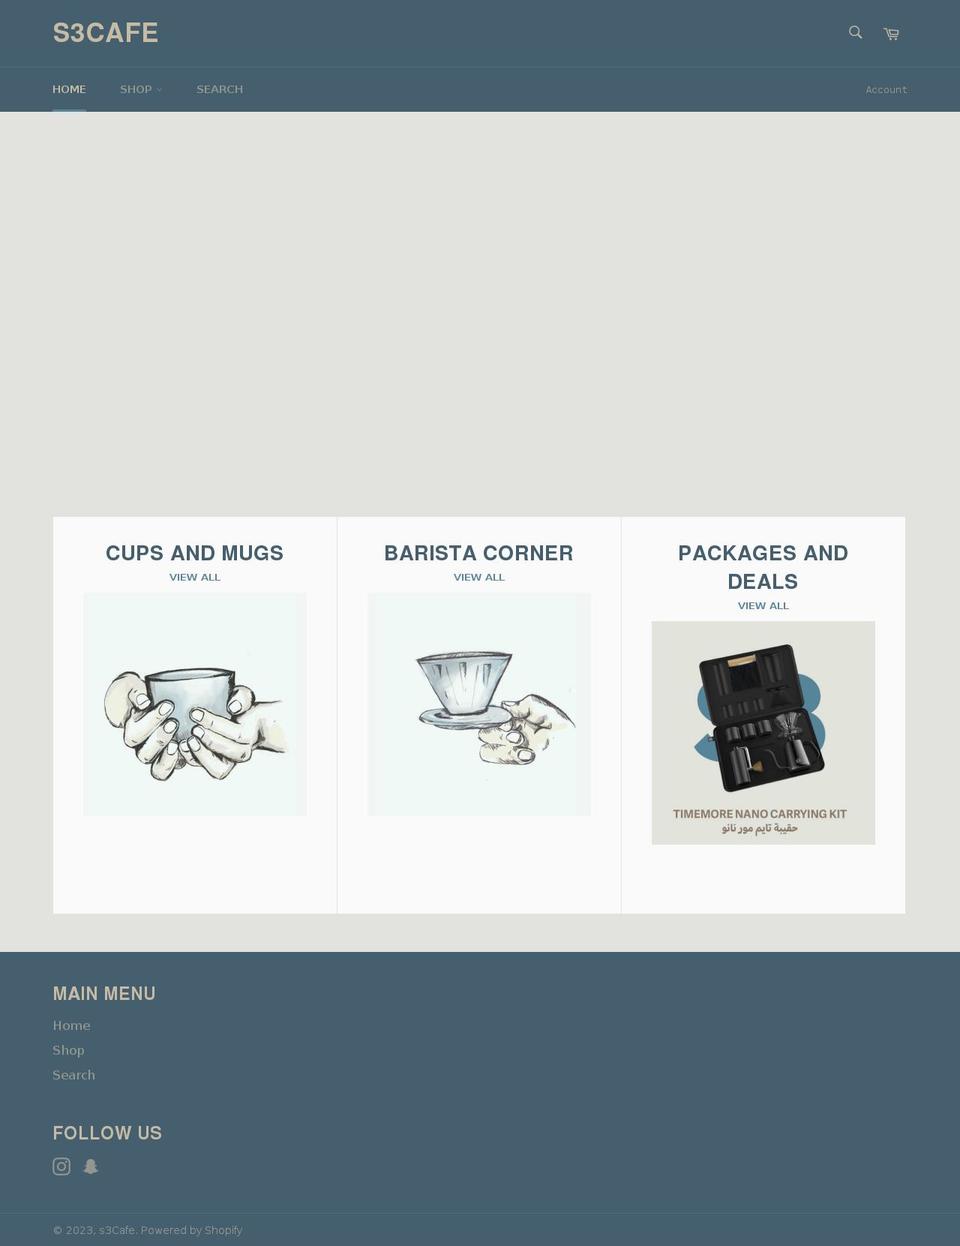 space Shopify theme site example s3cafe.com